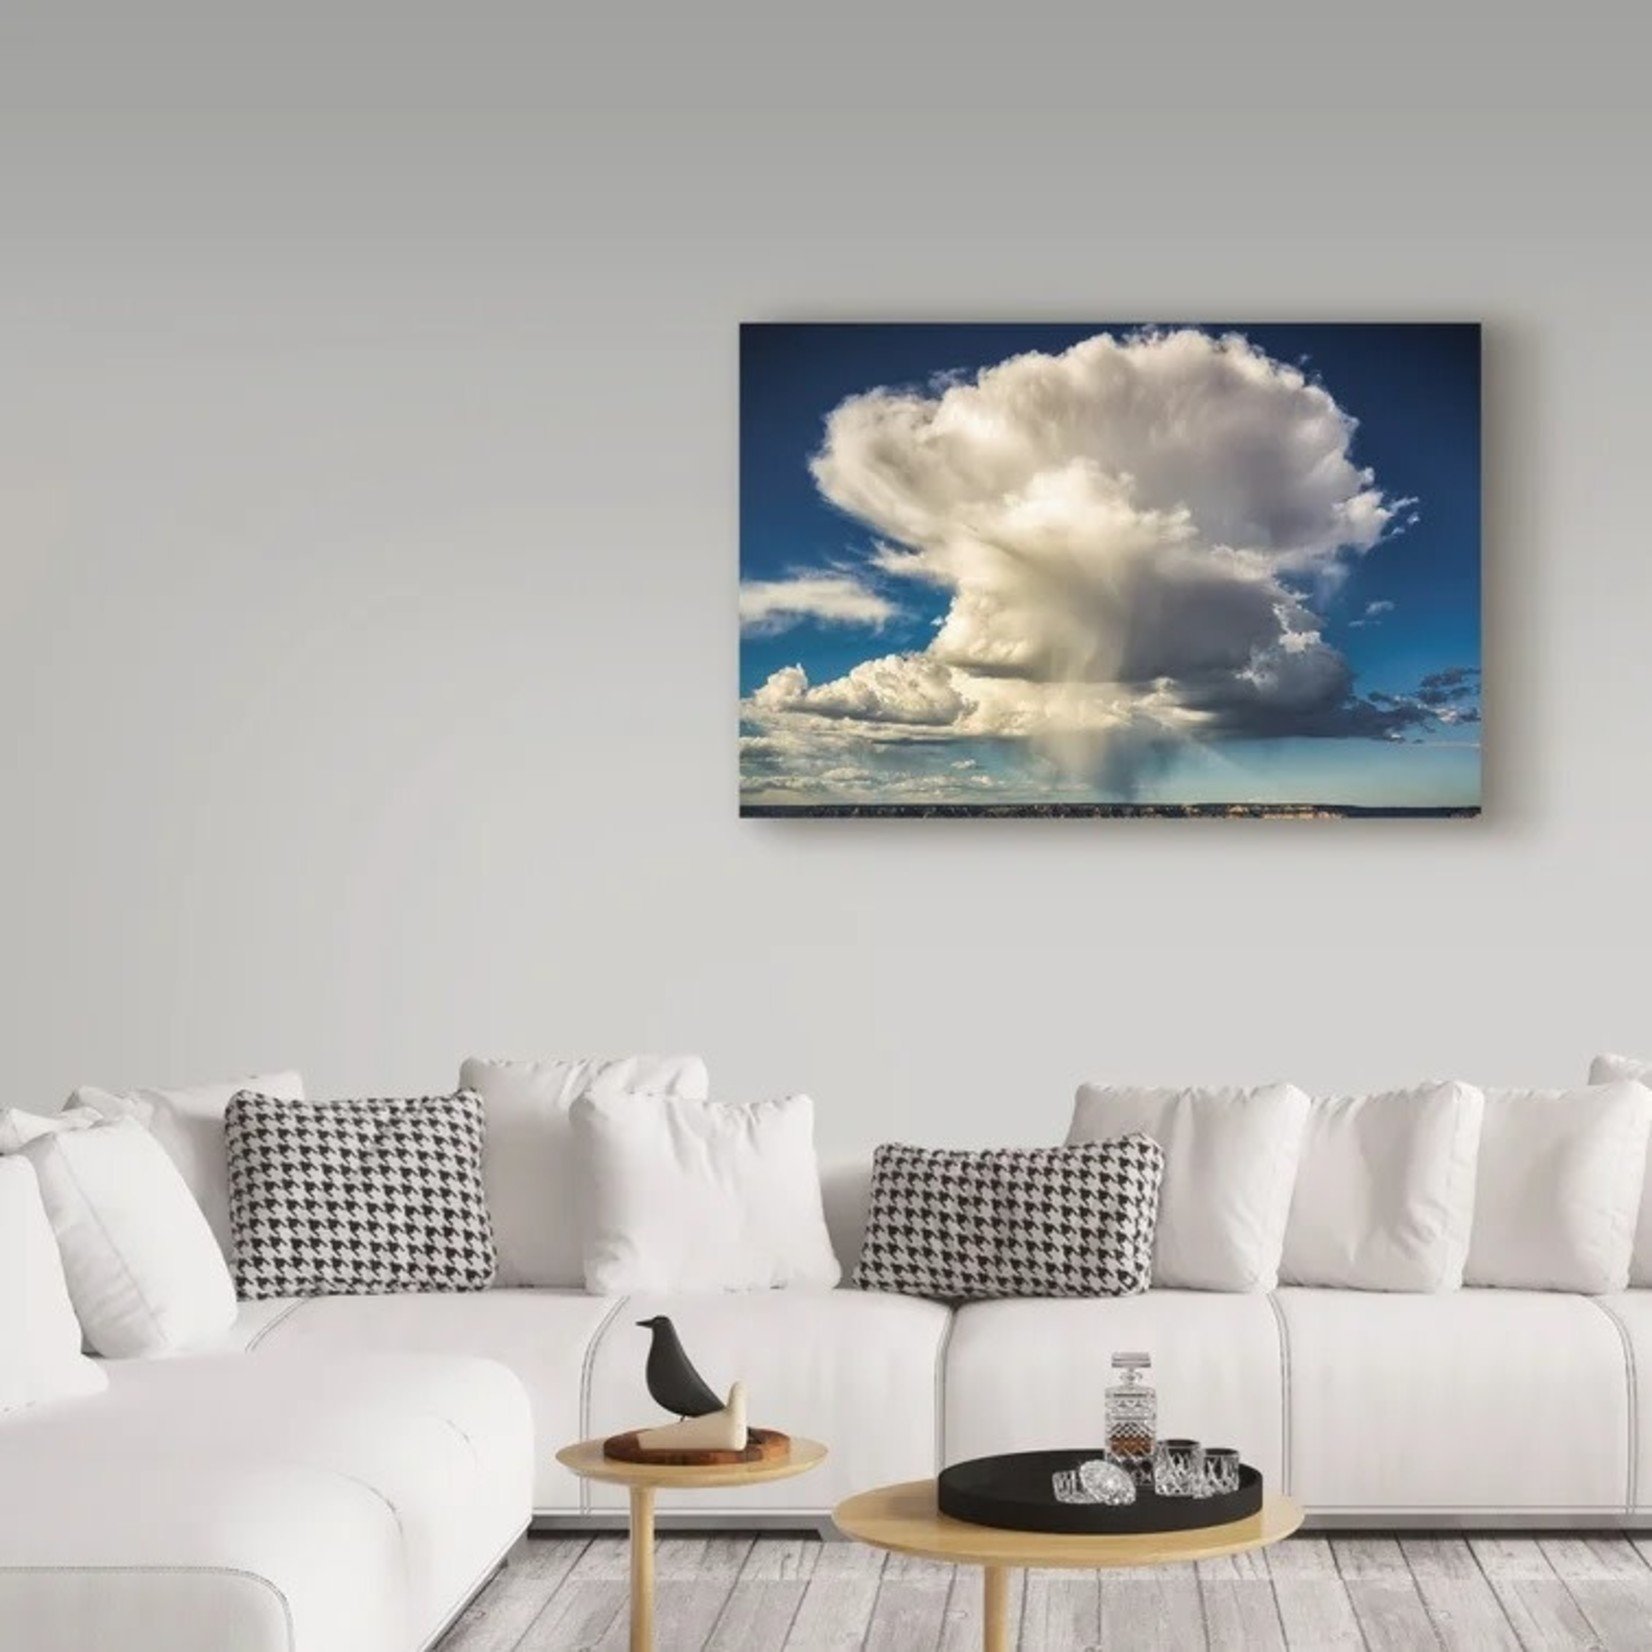 *16" x 24" Huge' Photographic Print on Wrapped Canvas